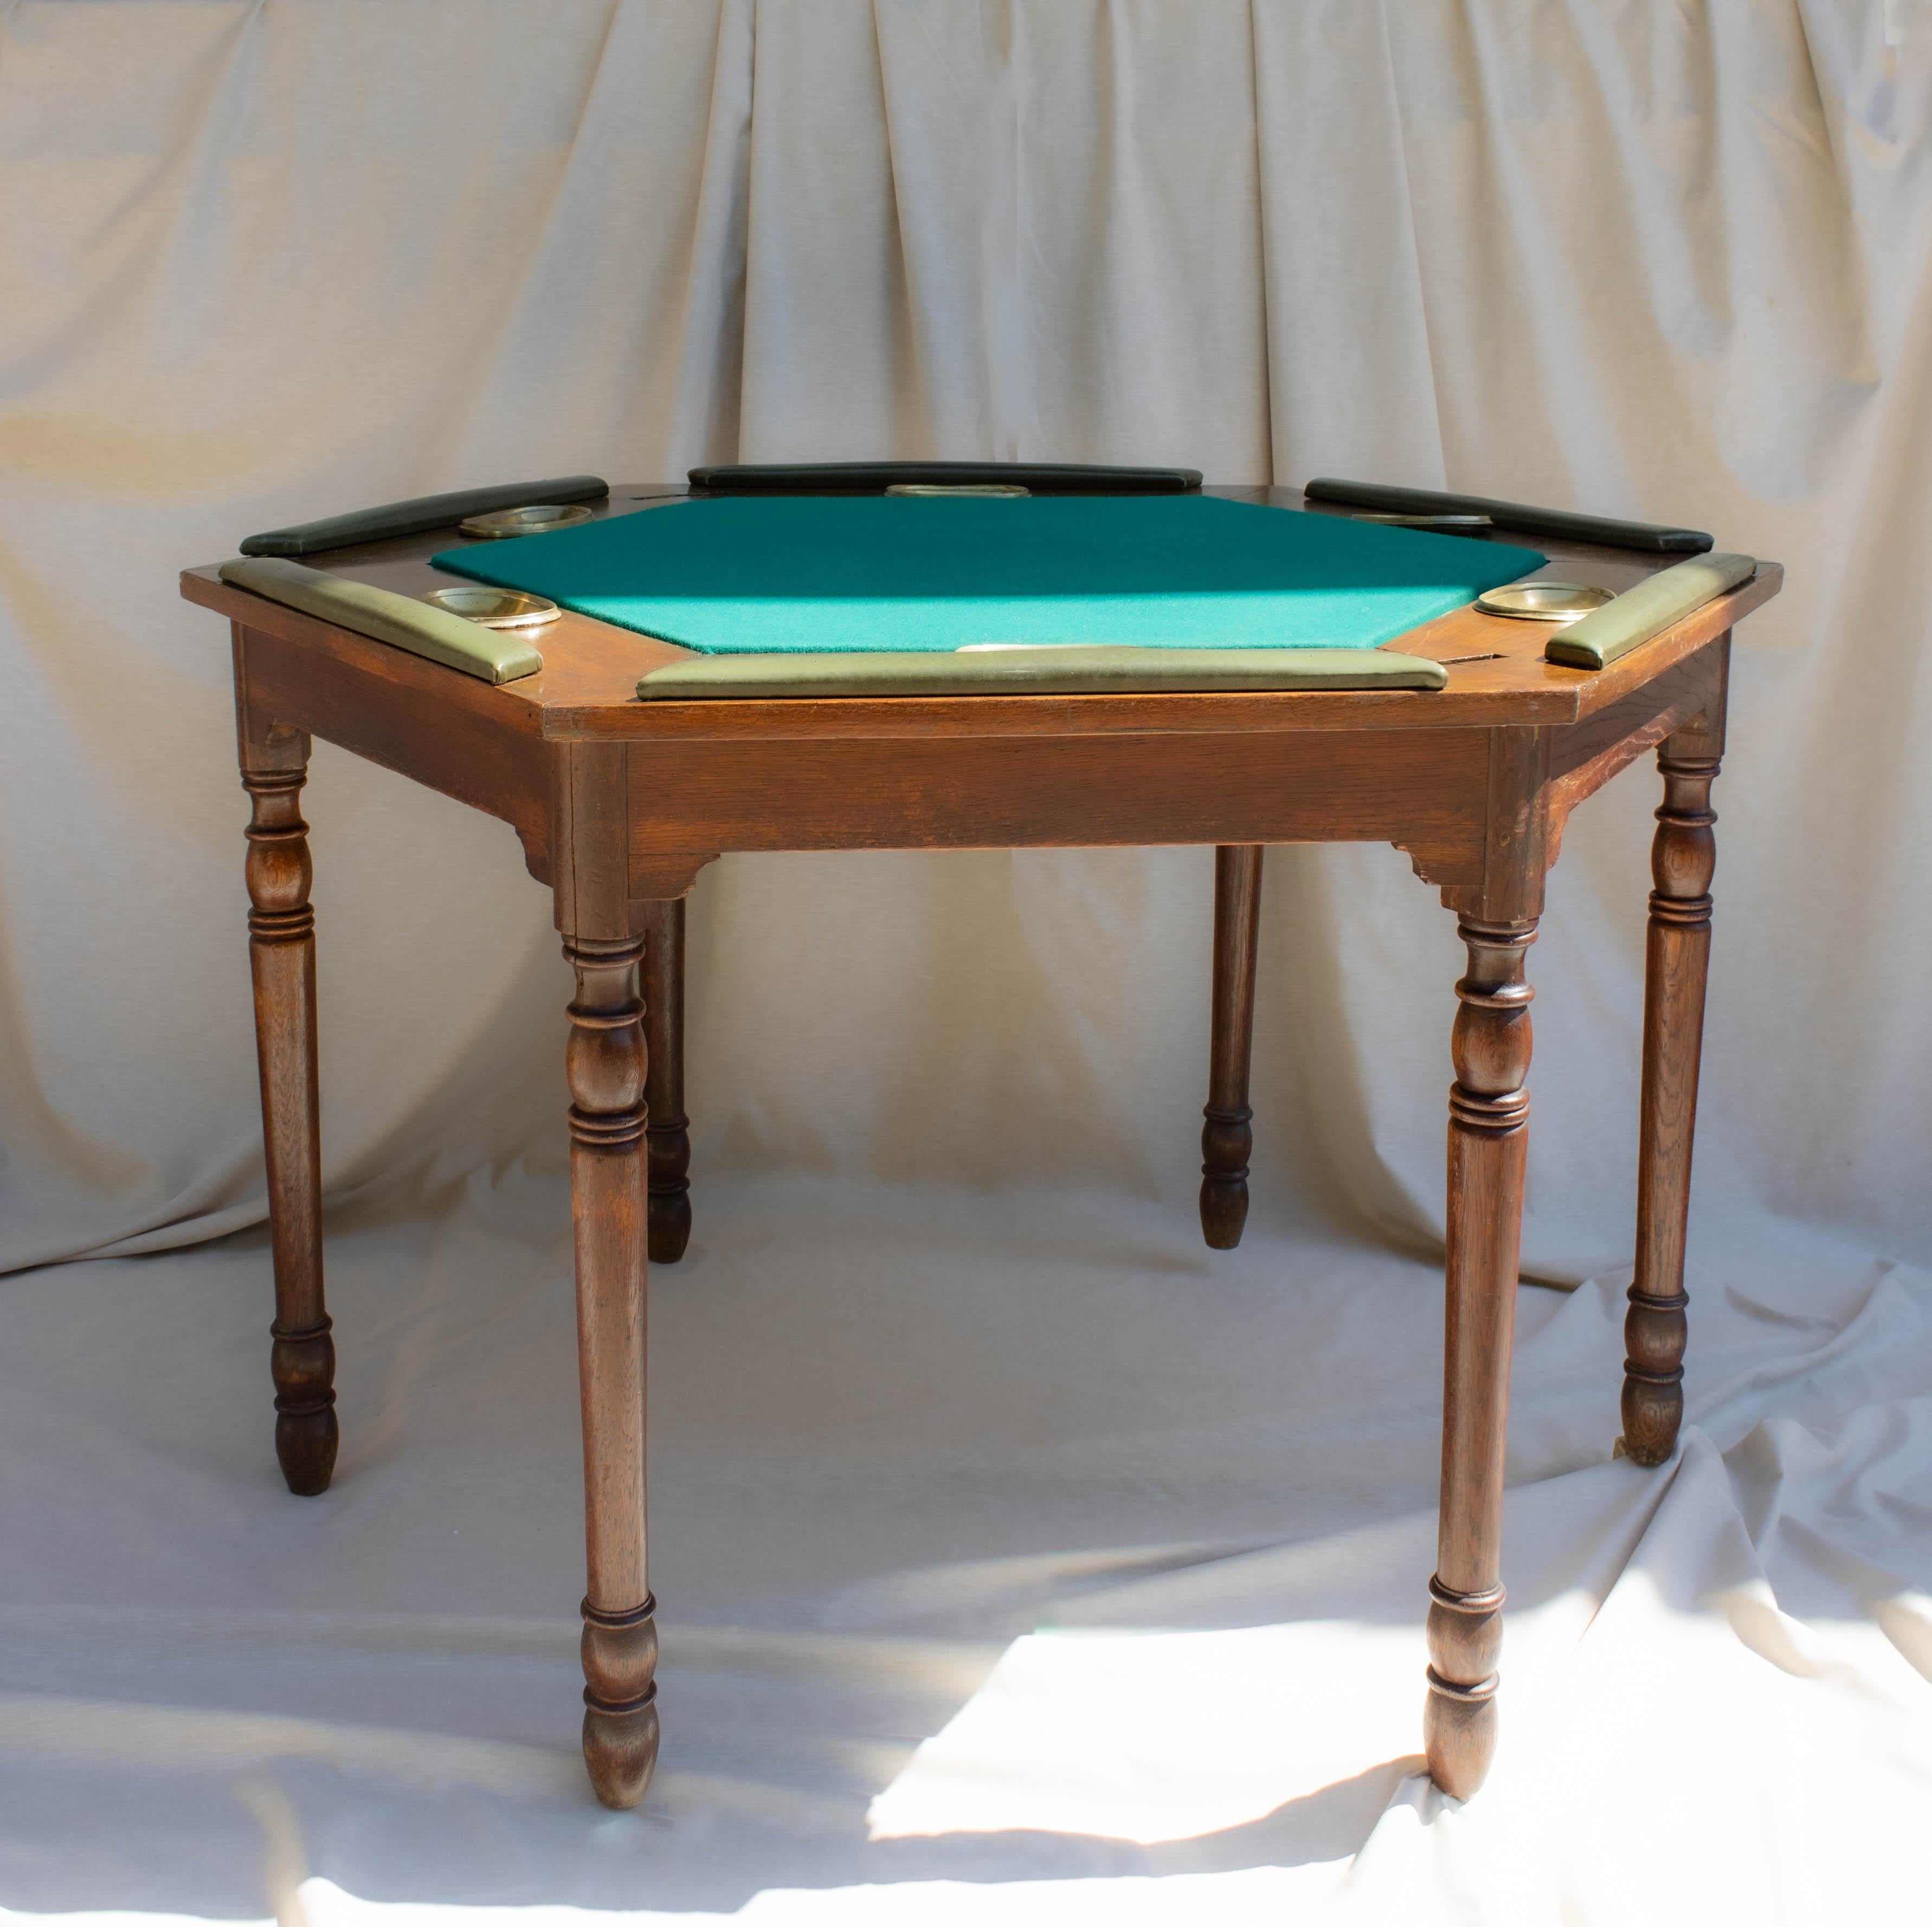 Hex Game Table is a hexagon-shaped gaming table with wood carvings, green felt top, and golden bronze ashtrays. It has green leather armrests for greater comfort during games. This particular table is an antique nineteenth-century piece that was